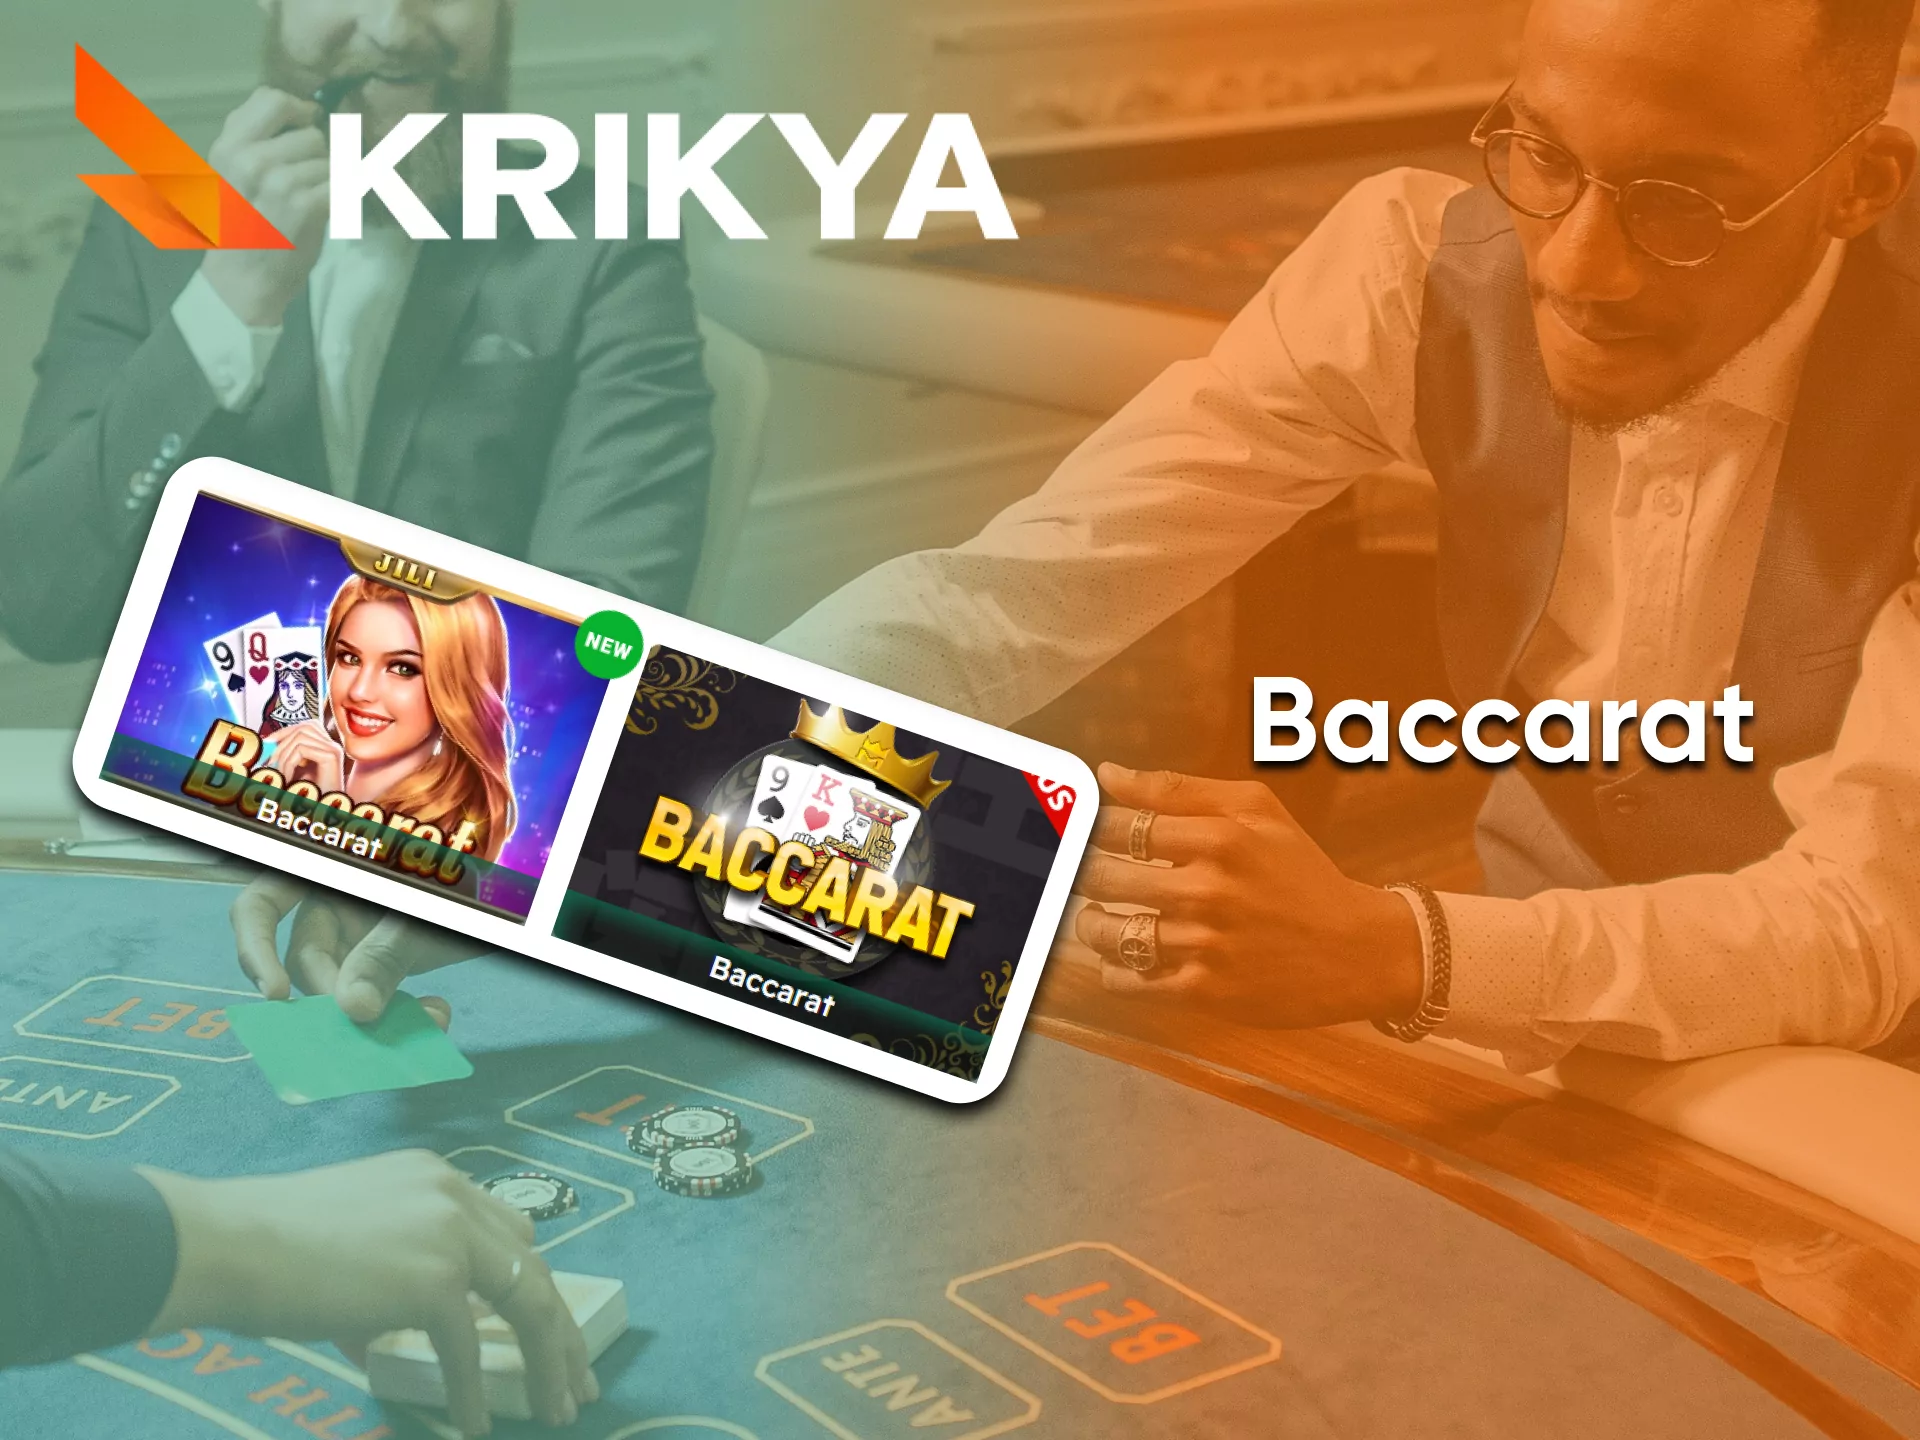 Fans of card games can play Baccarat by Krikya.